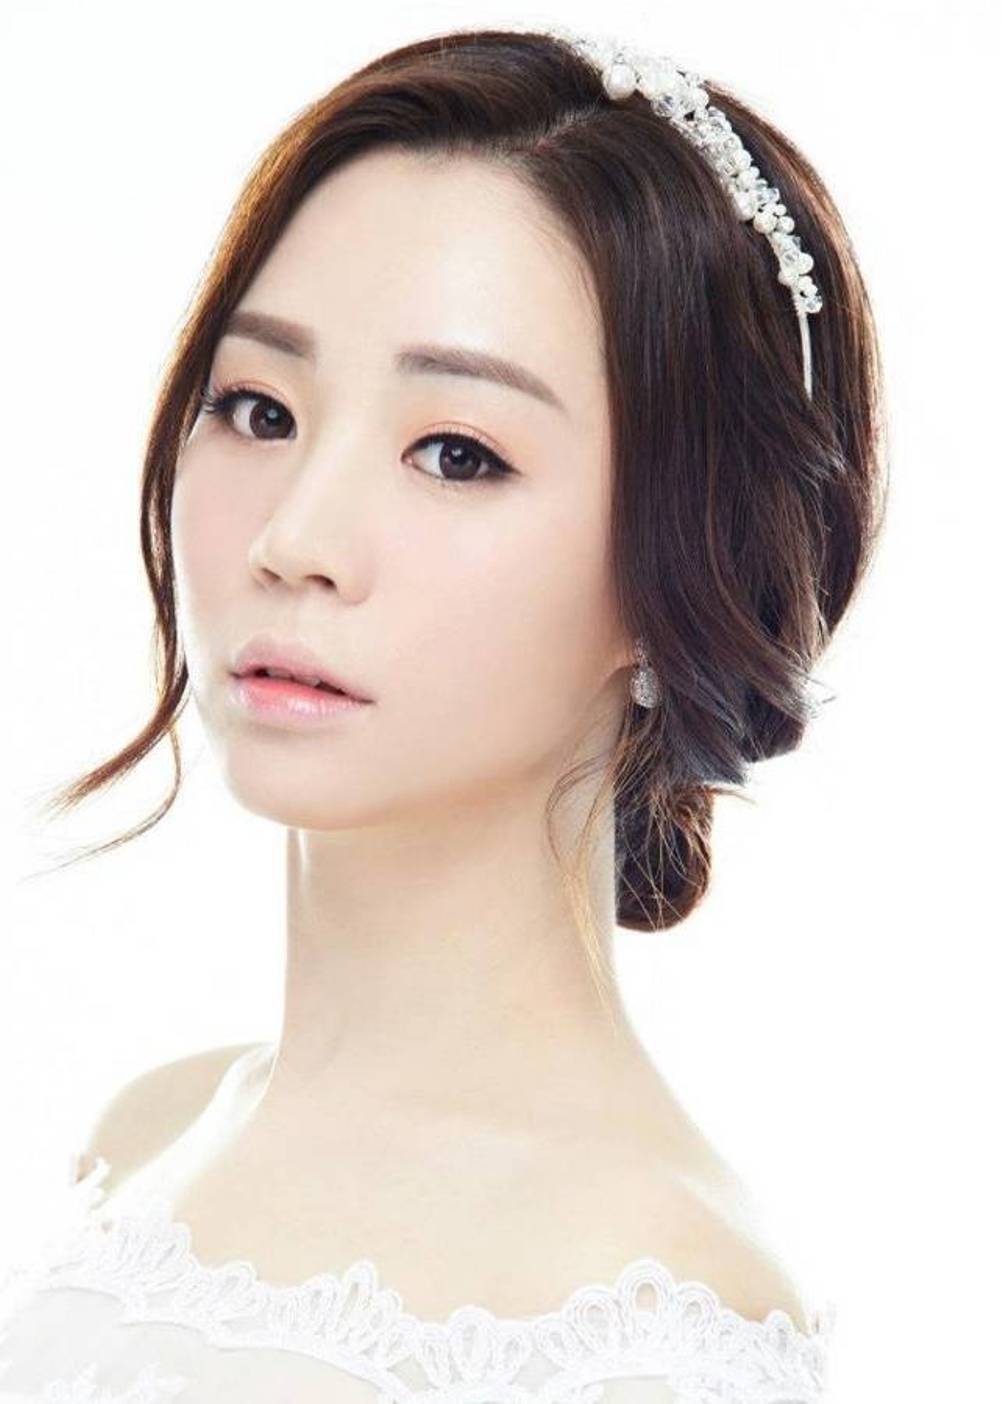 14 Best Korean Wedding Hairstyle 2015 - Image And Picture ...